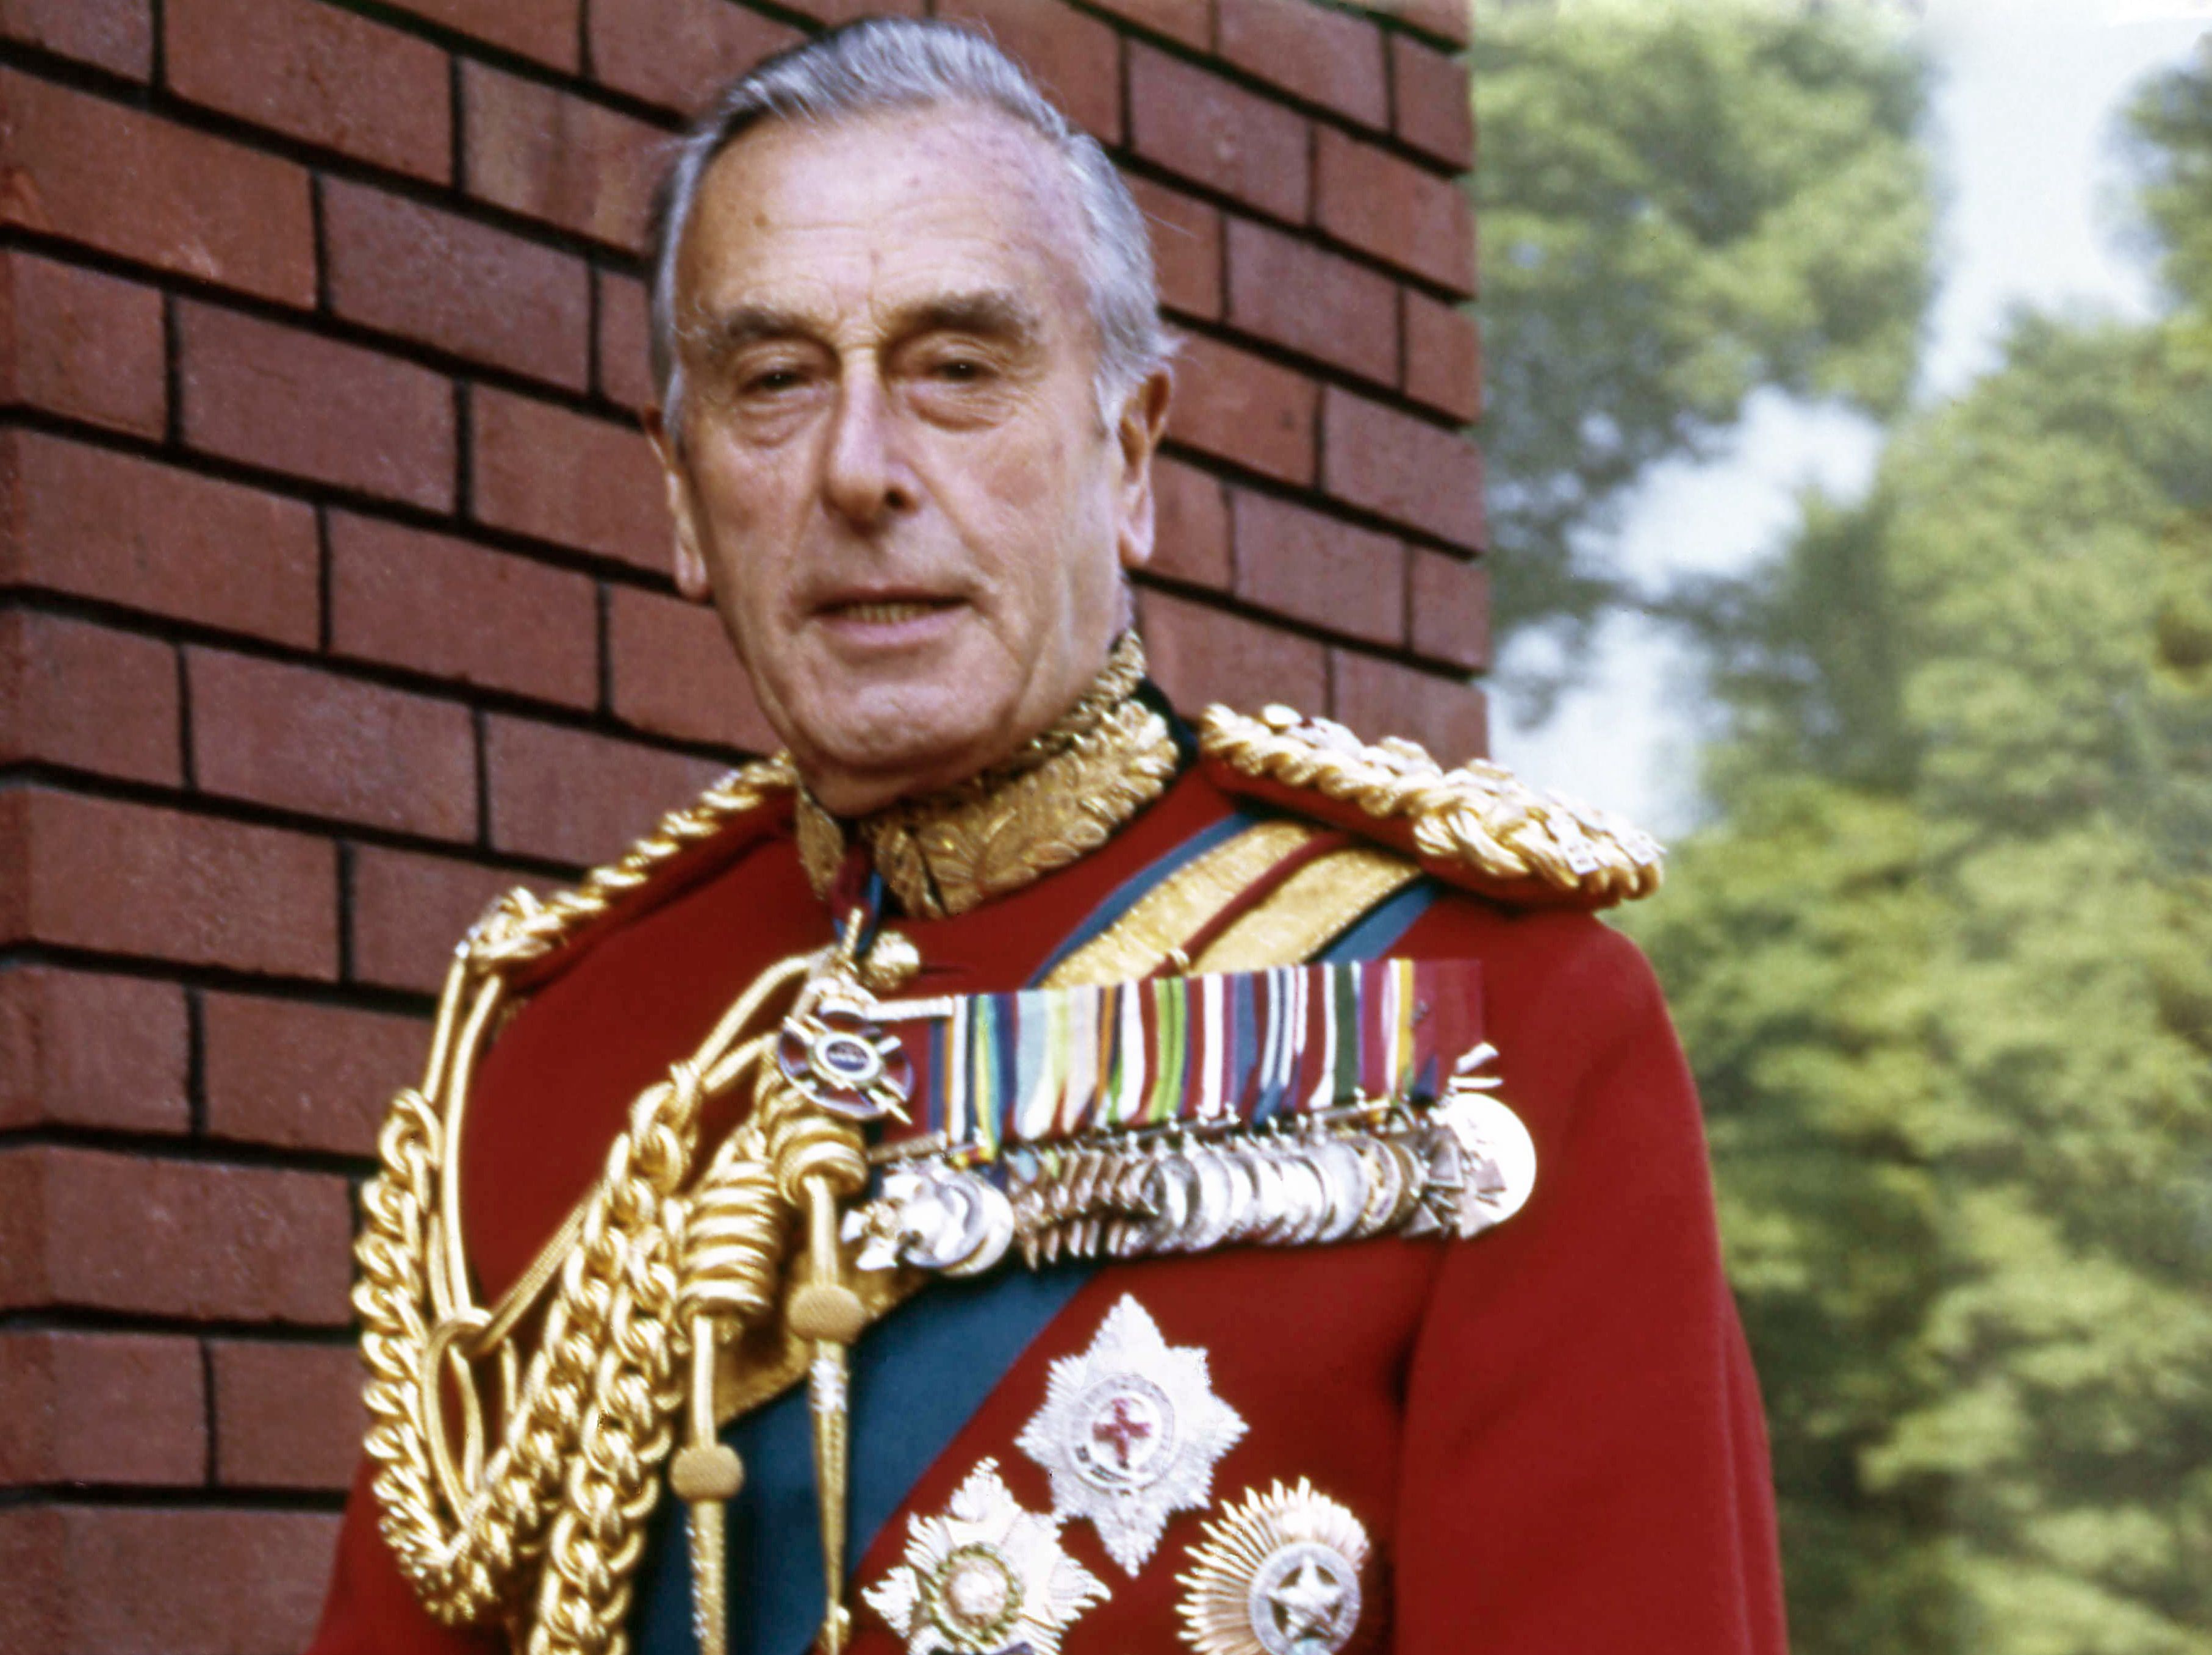 Yes, Mountbatten was an alleged pedophile, and "The Crown" gets Irish